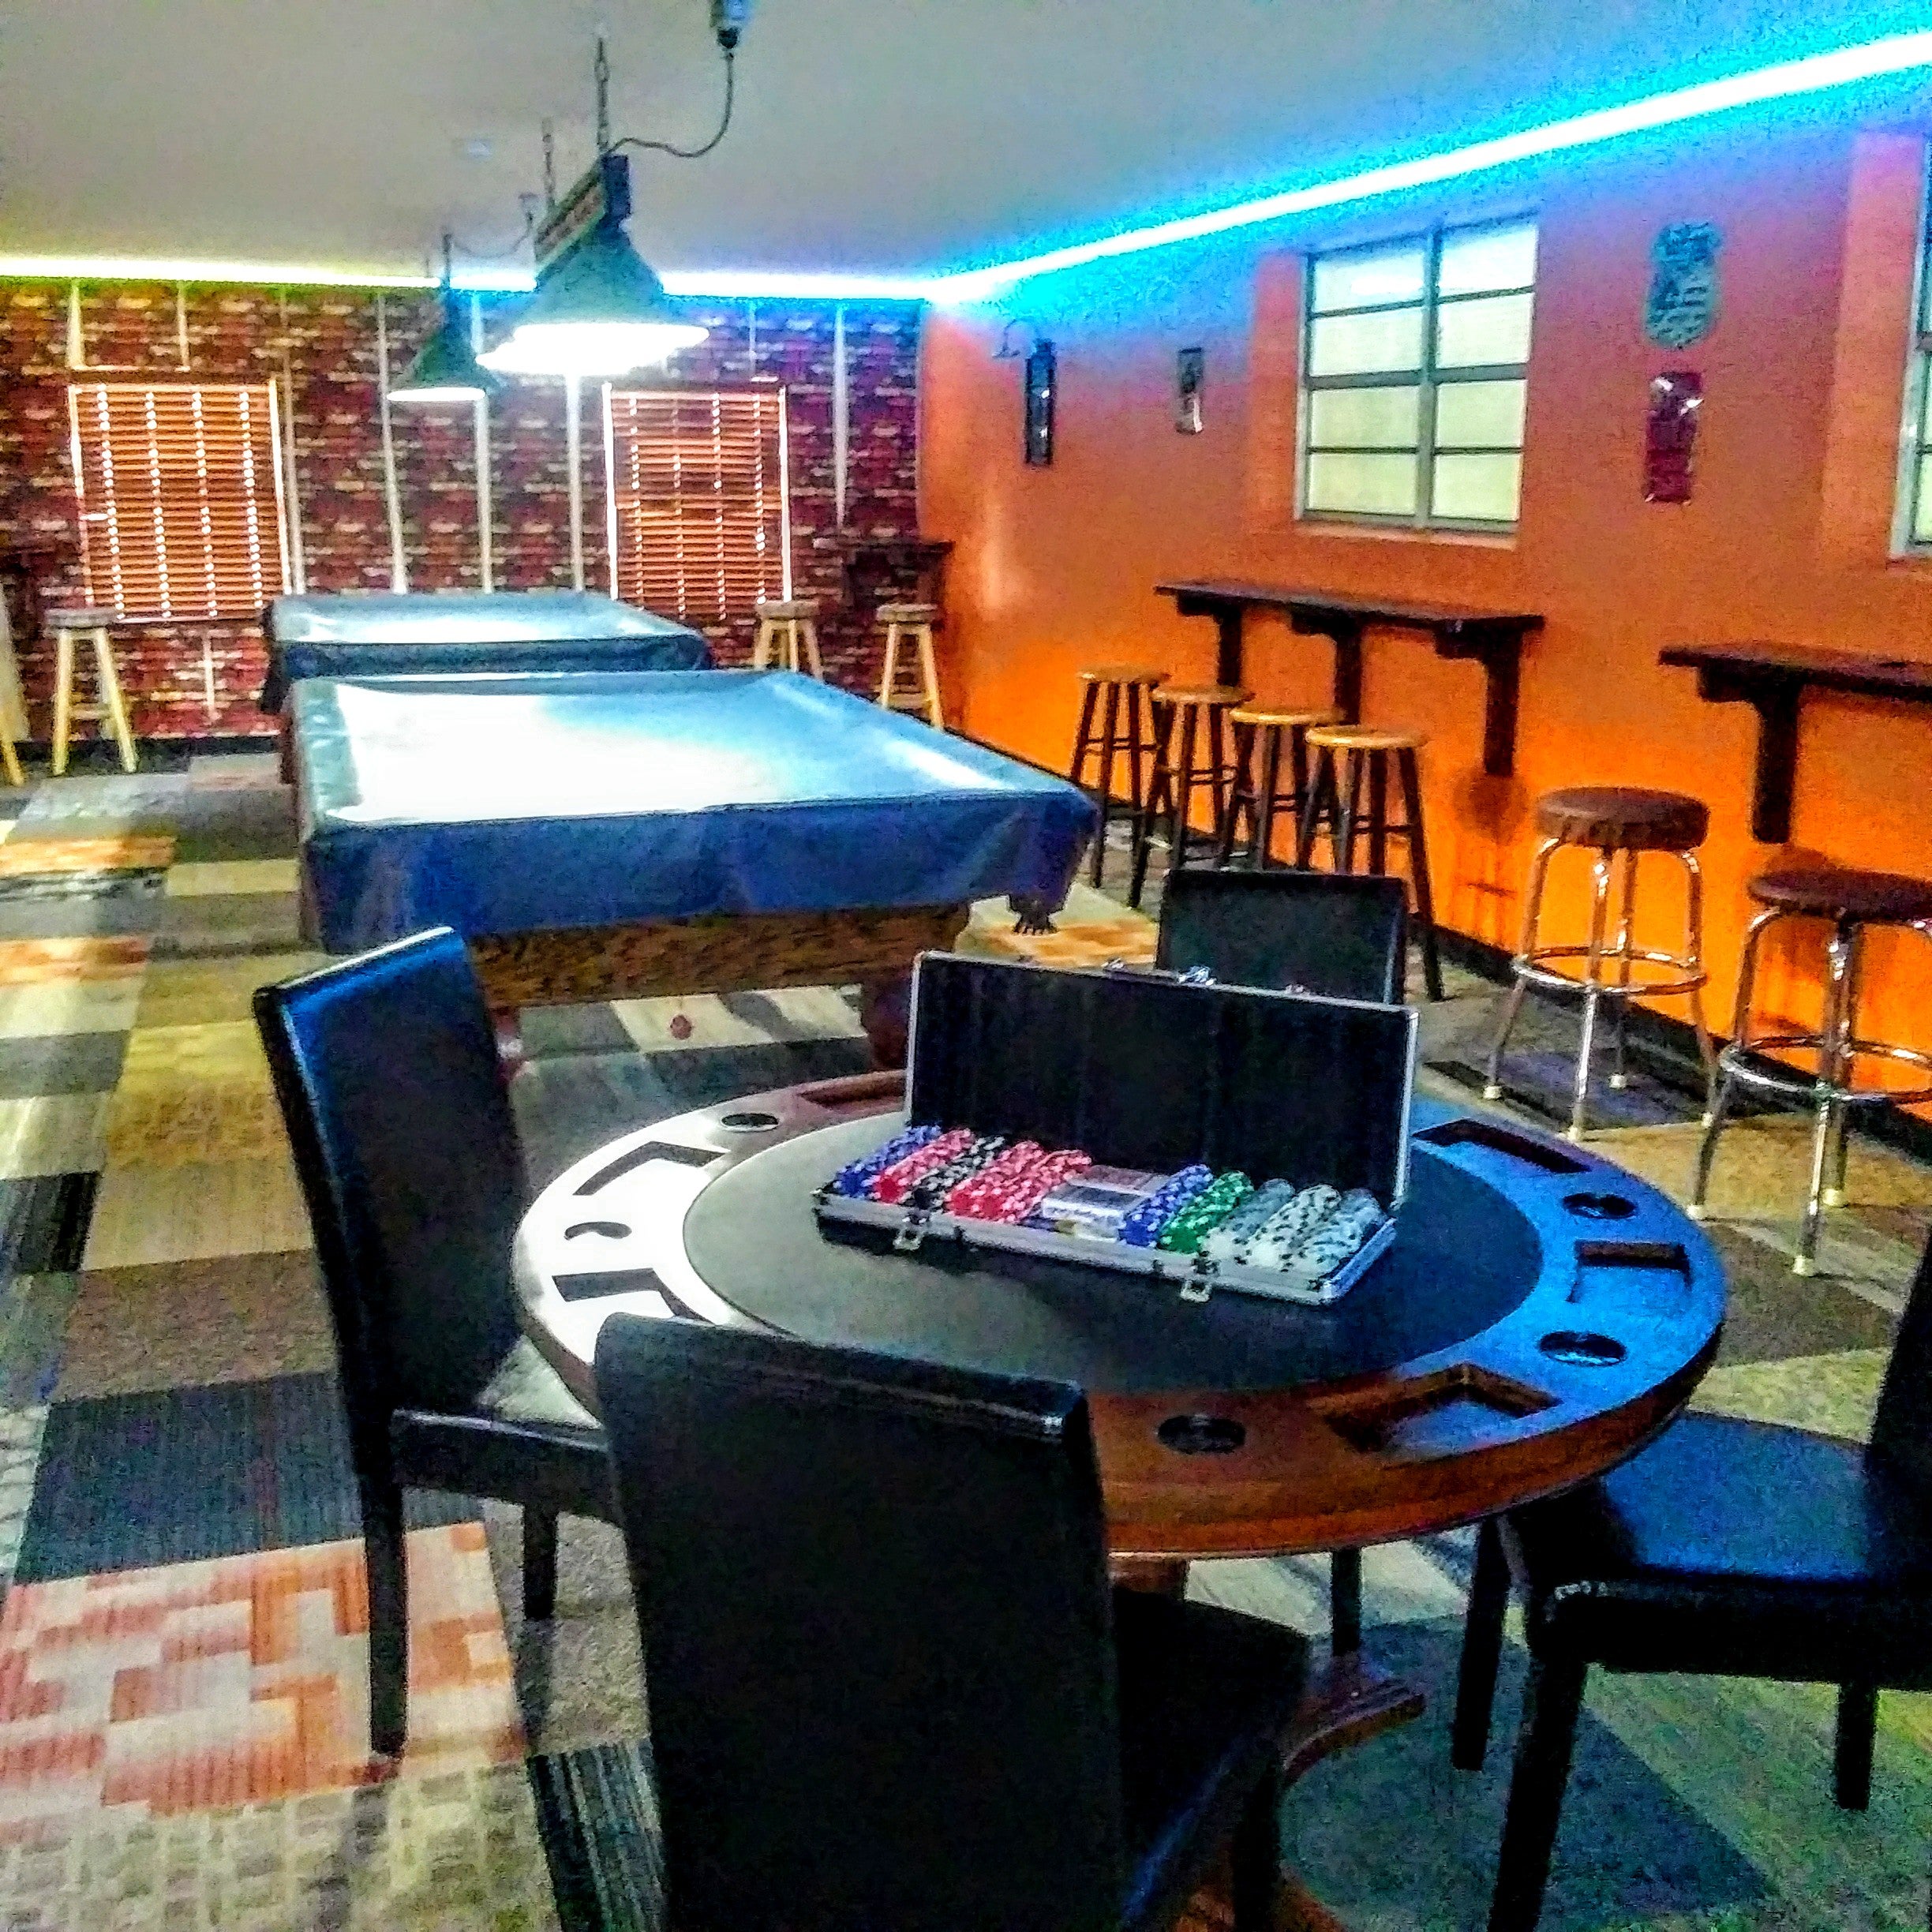 Newly remodeled game room with pool tables, darts, poker table and bar.